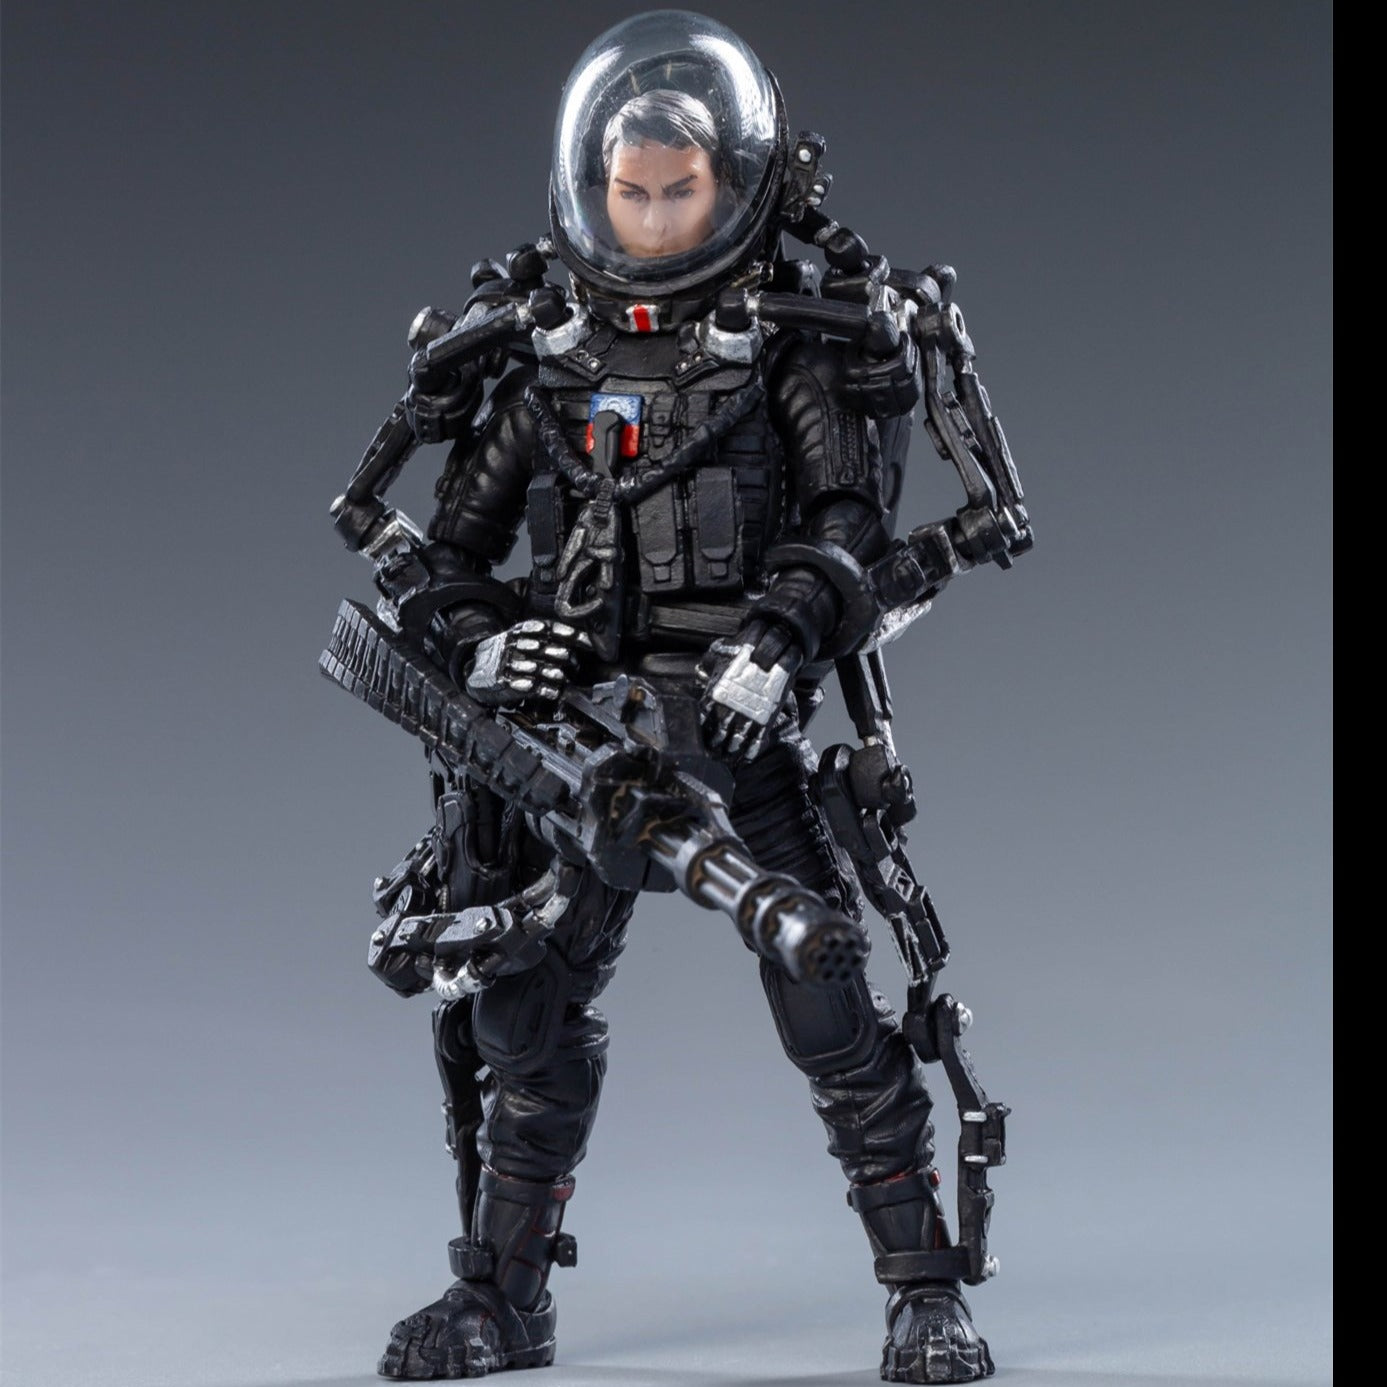 JoyToy 1/18 Action Figures 4-Inch The Wandering Earth United Earth Government China Rescue Team- Heavy Gunner FM 1411 Default Title Official Joytoy Online Merch